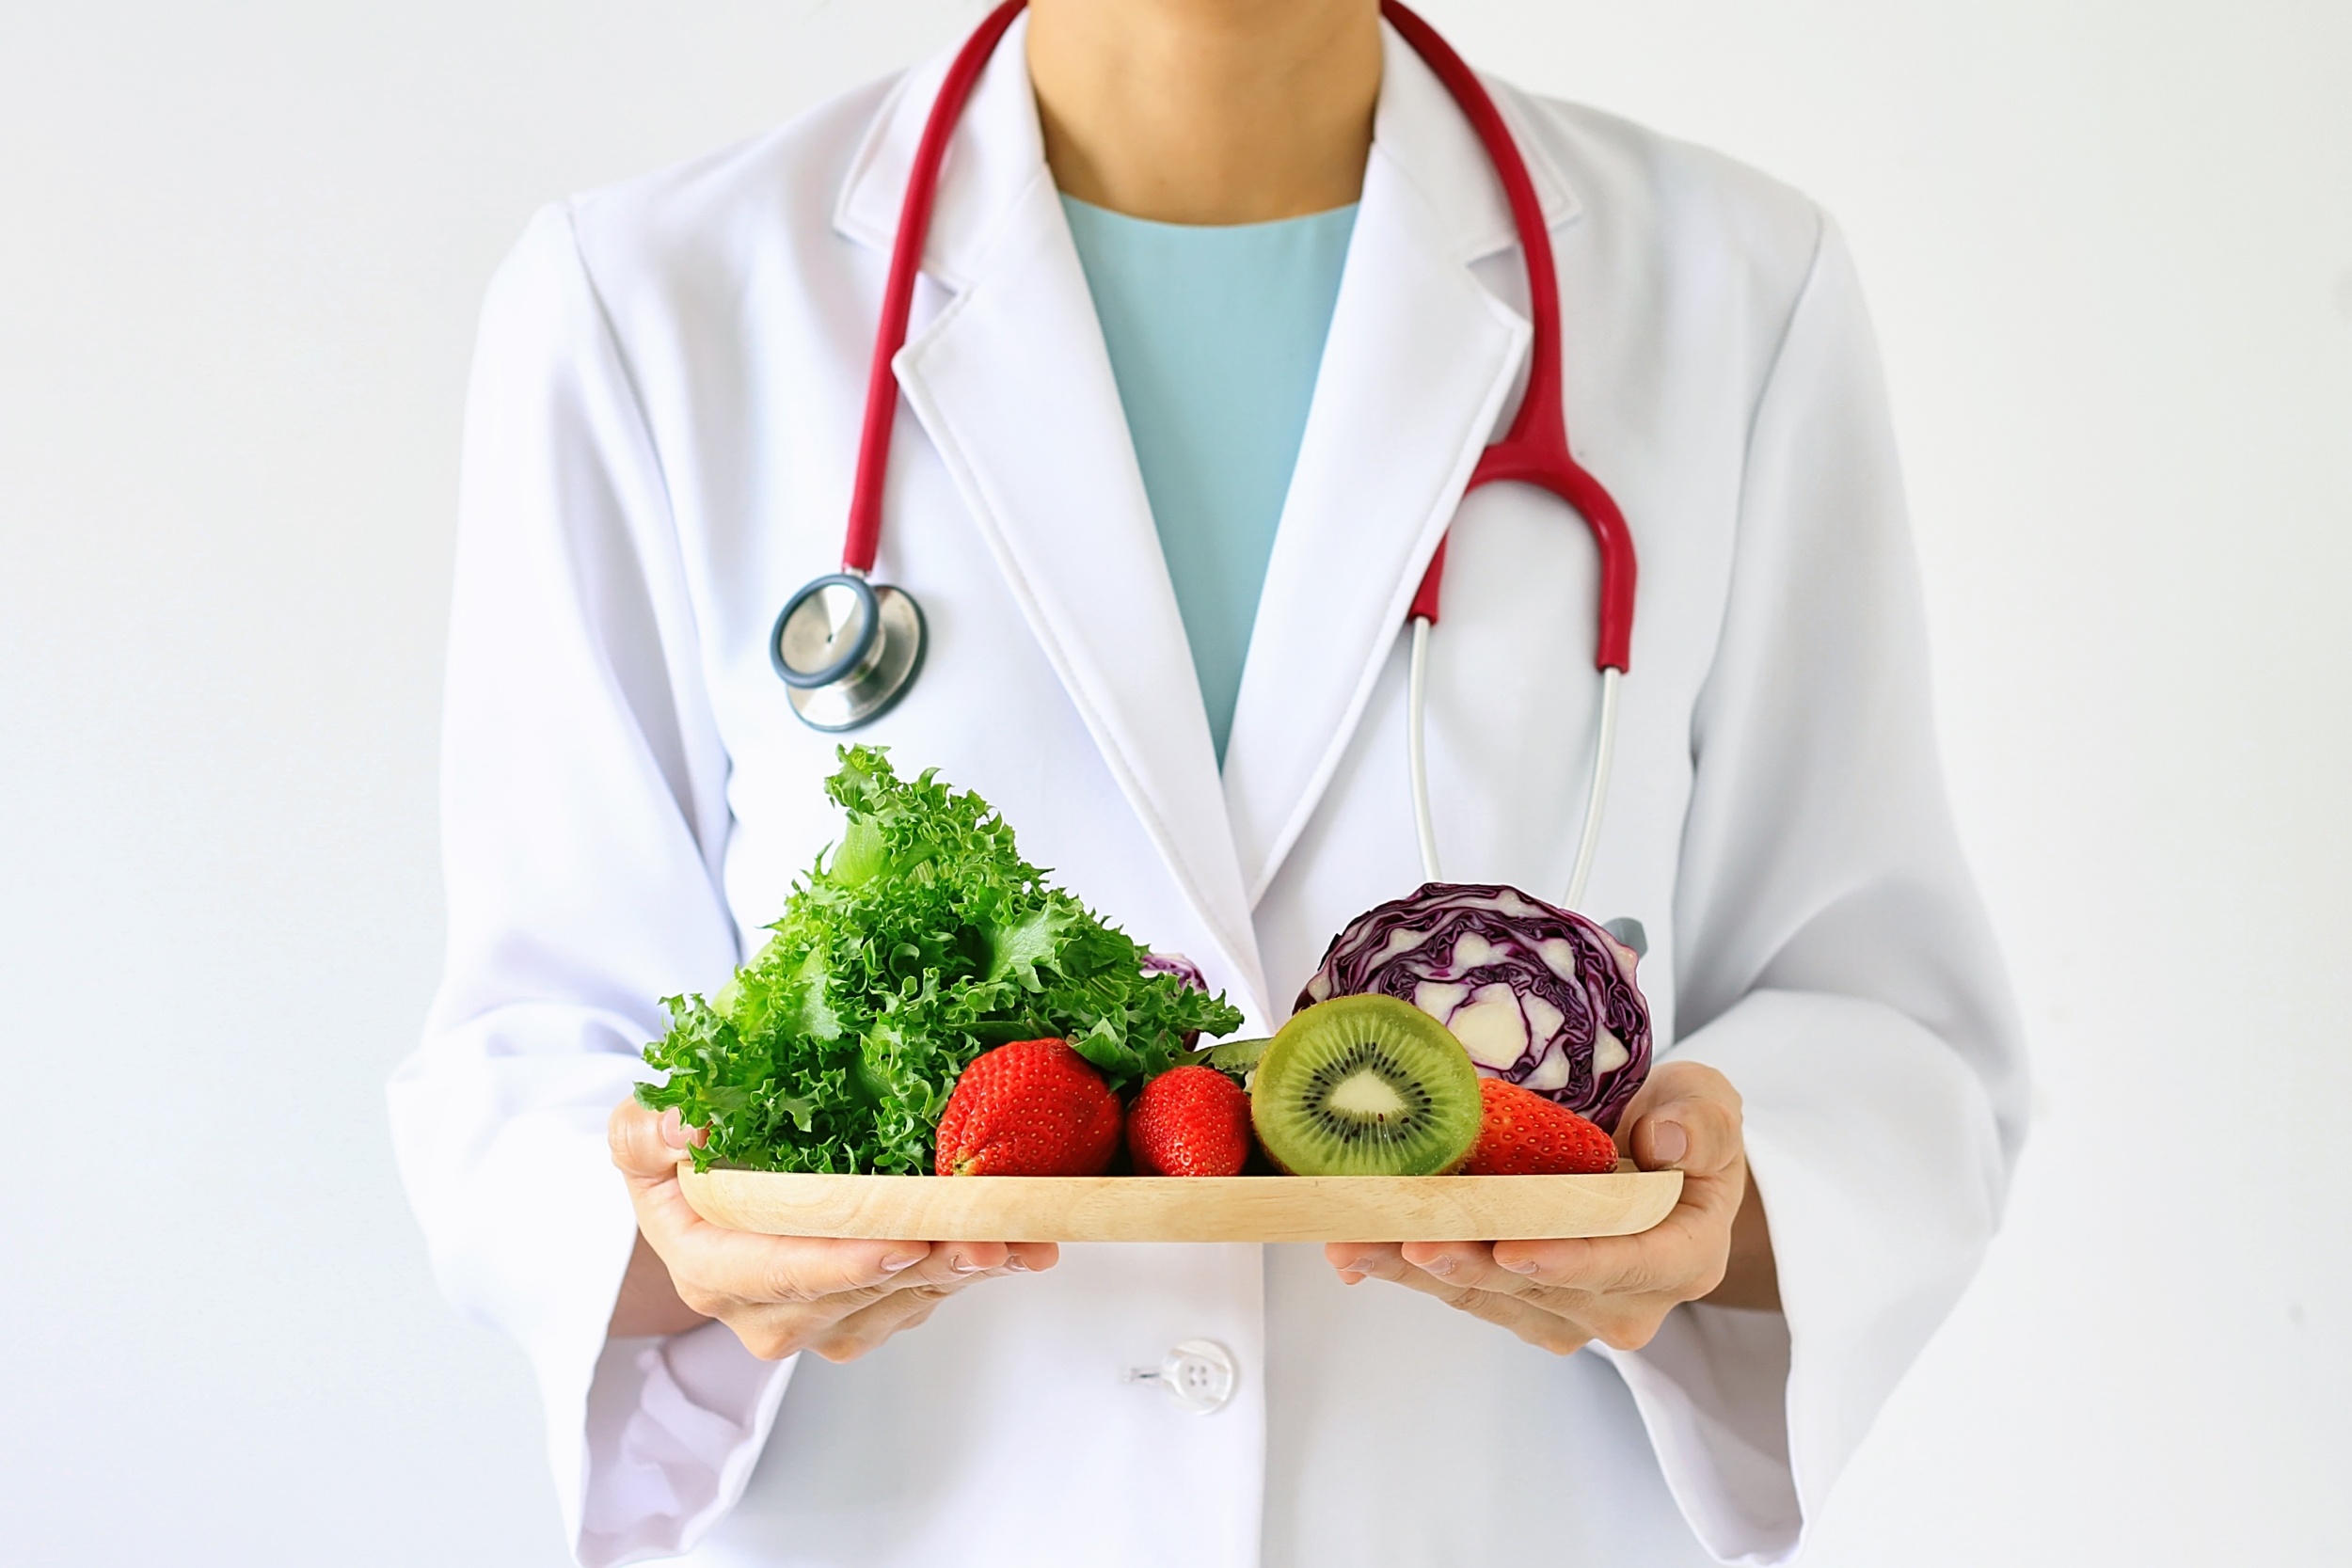 Increasing plant-based offerings at hospitals can improve community health outcomes